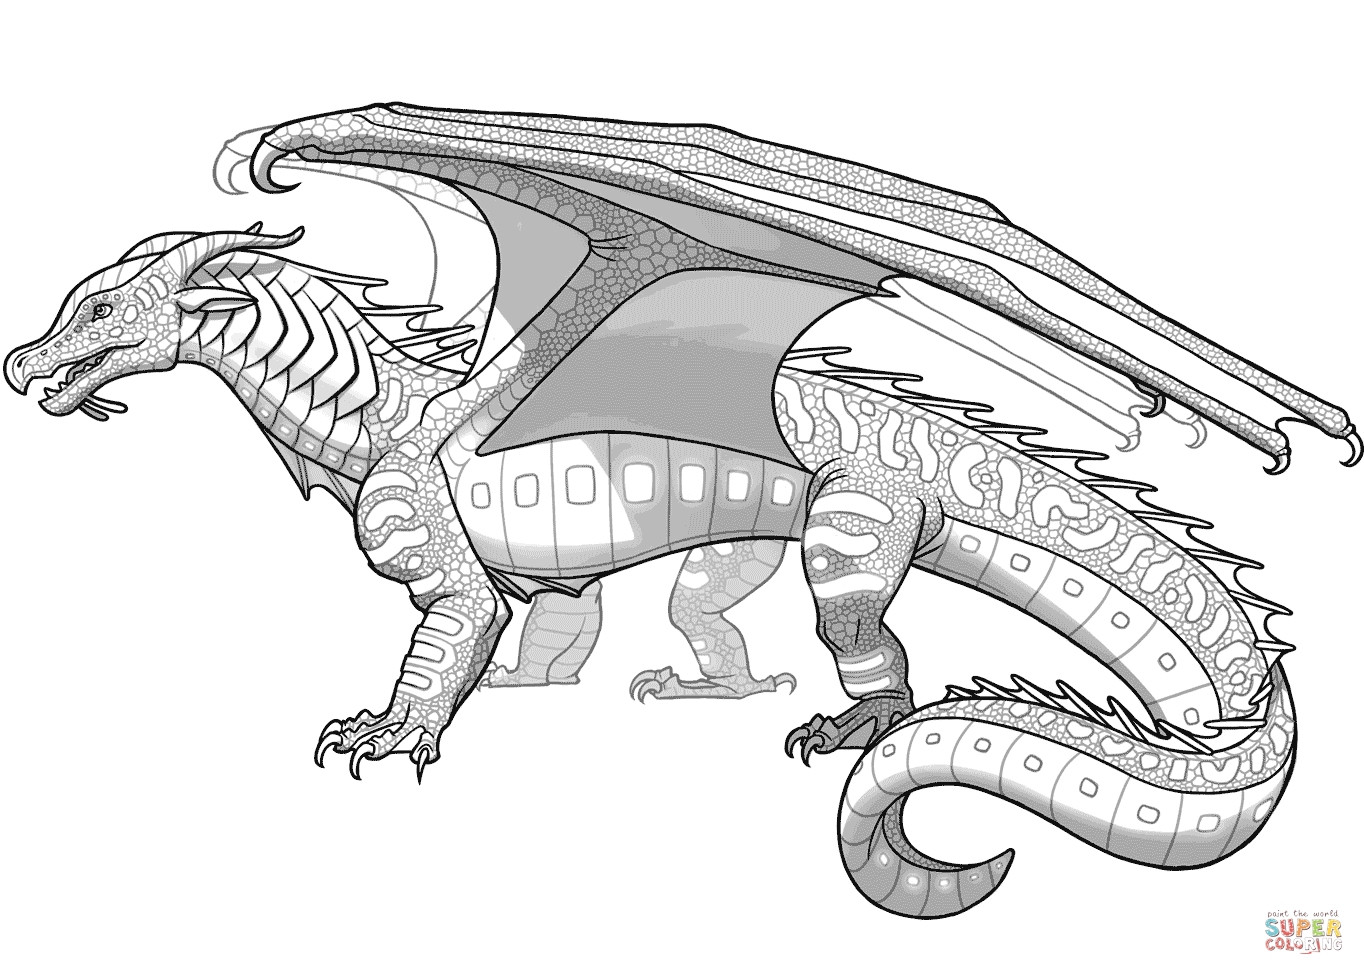 Wings Of Fire Nightwing Coloring Pages
 Wings Fire Nightwing Coloring Pages Collection